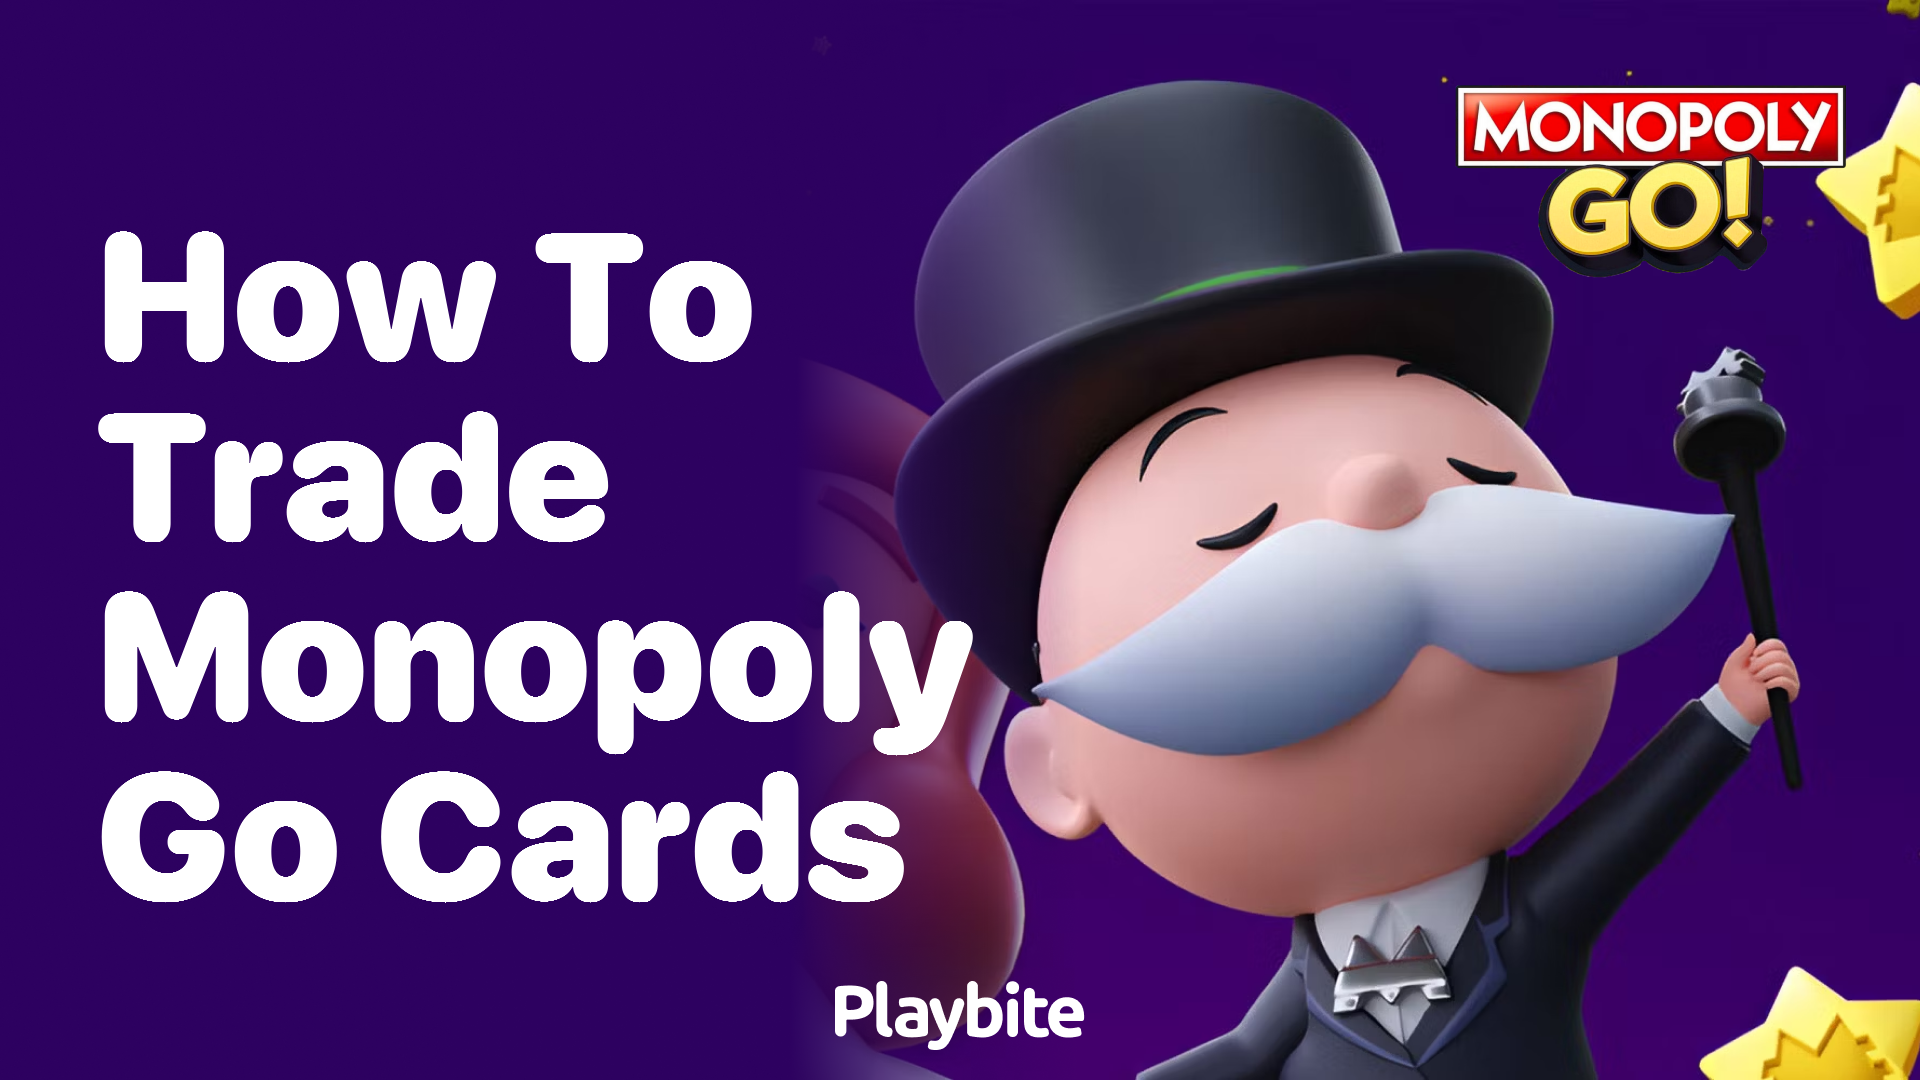 How to Trade Monopoly Go Cards: A Simple Guide